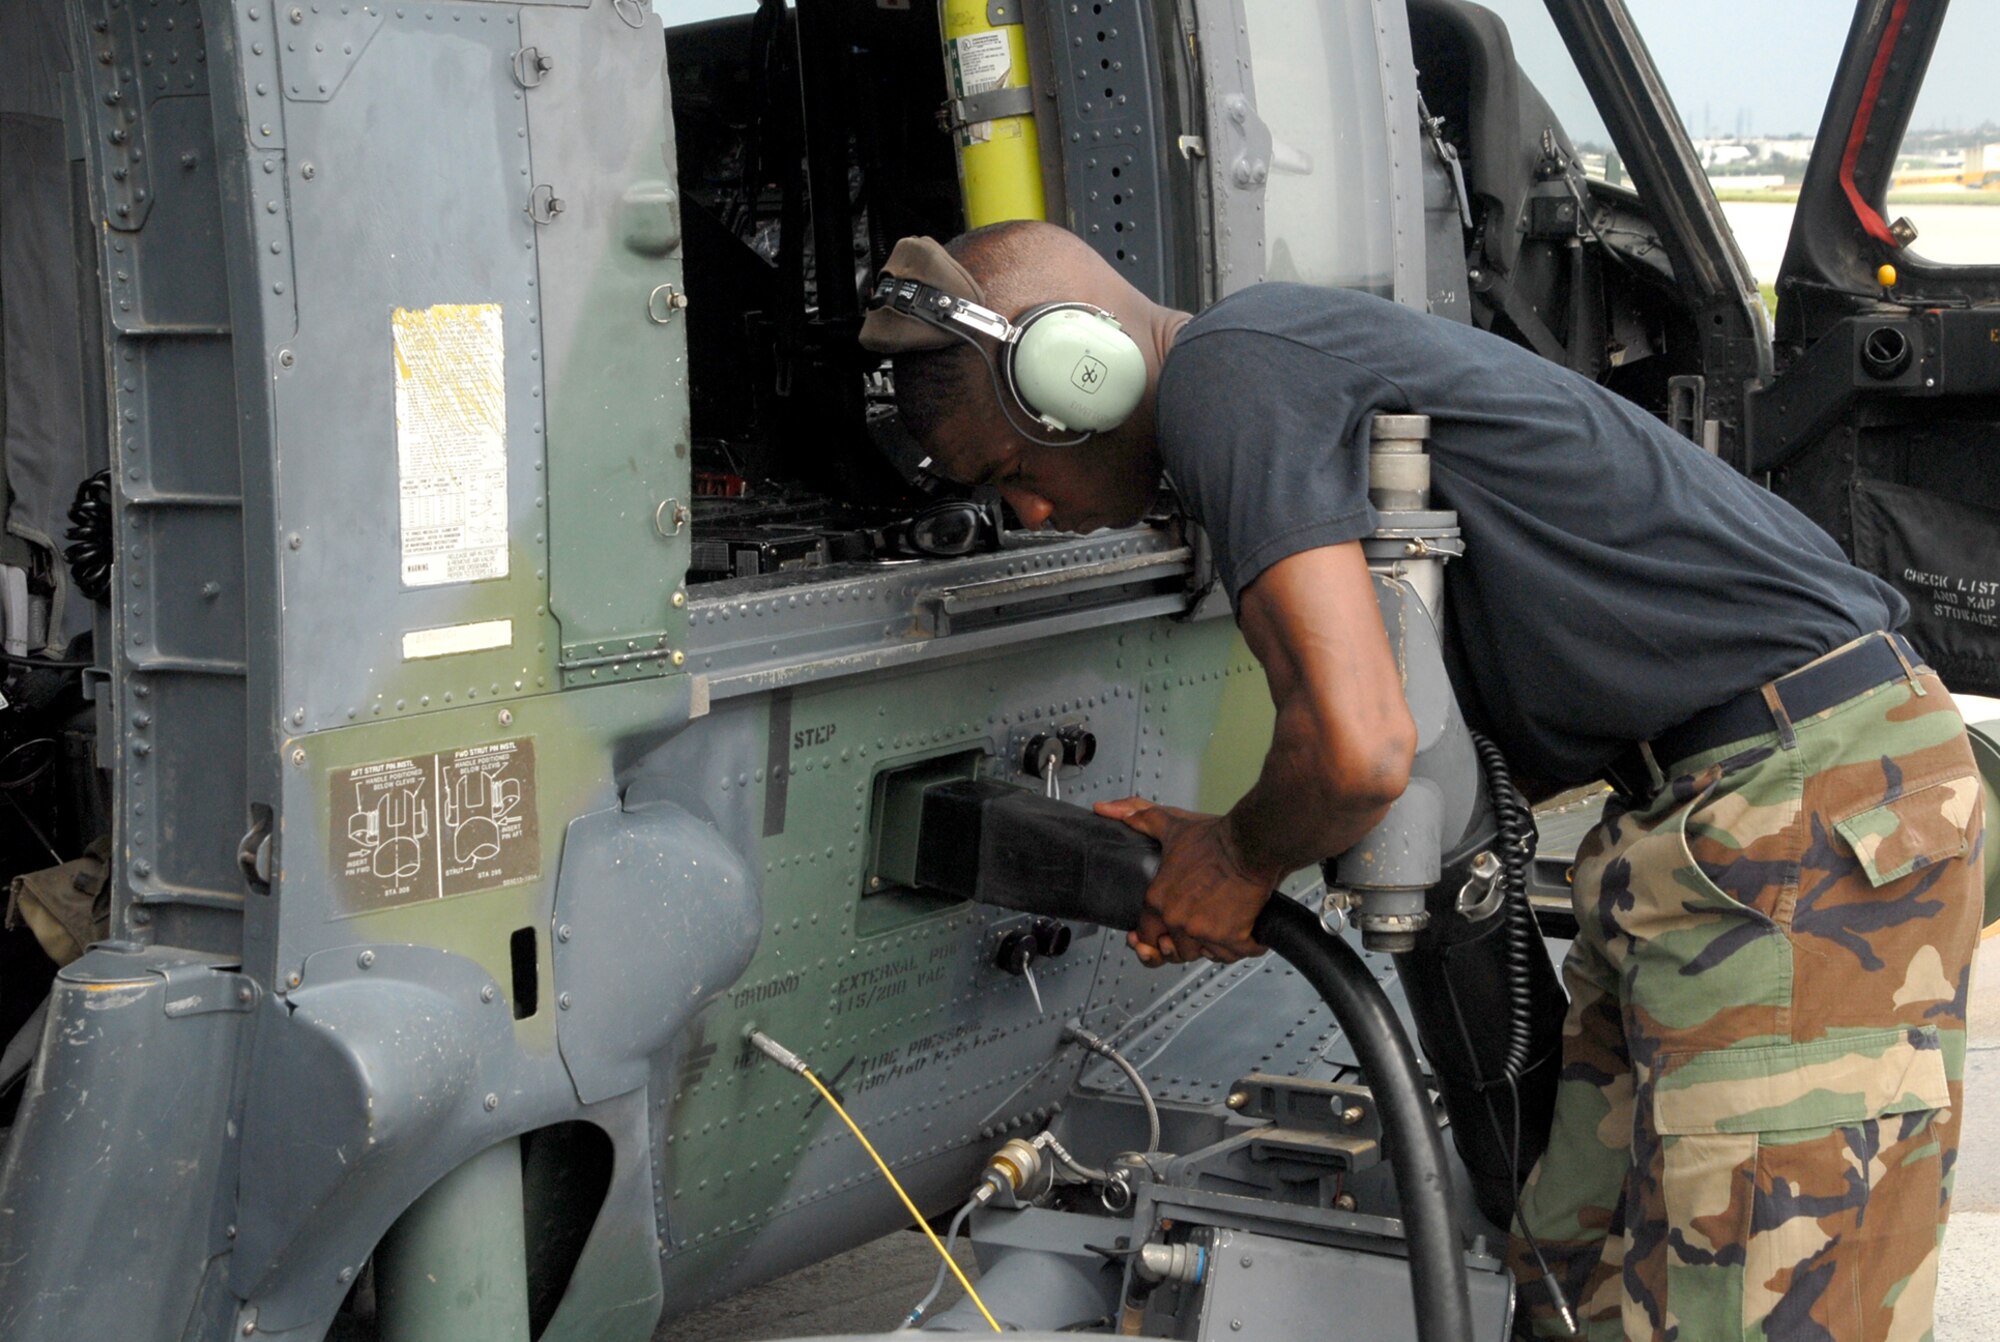 Staff Sgt. Birdeal Ferguson, a crew chief with the 718th Aircraft Maintenance Squadron, Kadena Air Base, Japan, uses a generator to power up an HH-60 Pave Hawk helicopter at Kadena July 23.  The 33rd Rescue Squadron conducted training this week in preparation for its upcoming deployment to Kandahar, Afghanistan, to conduct combat search and rescue and medical rescue missions in support of Operation Enduring Freedom. The squadron is heading back to Afghanistan after returning from a four-month deployment to Kandahar in May. (U.S. Air Force Photo/Staff Sgt. Joshua J. Garcia)